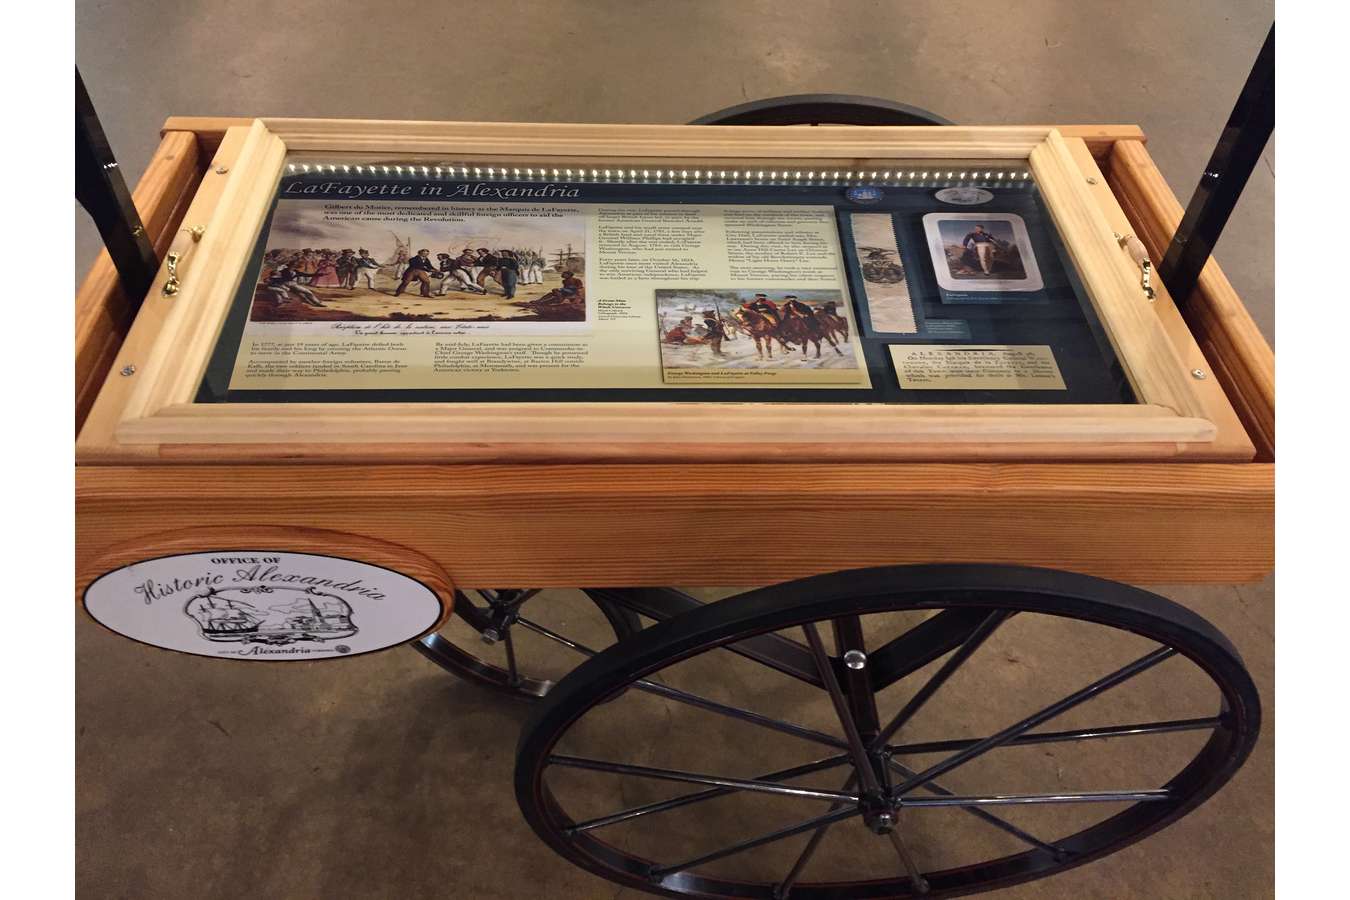 Lafayette Cart : History cart commemorating anniversary of the Marquis de Lafayette's visit to Alexandria